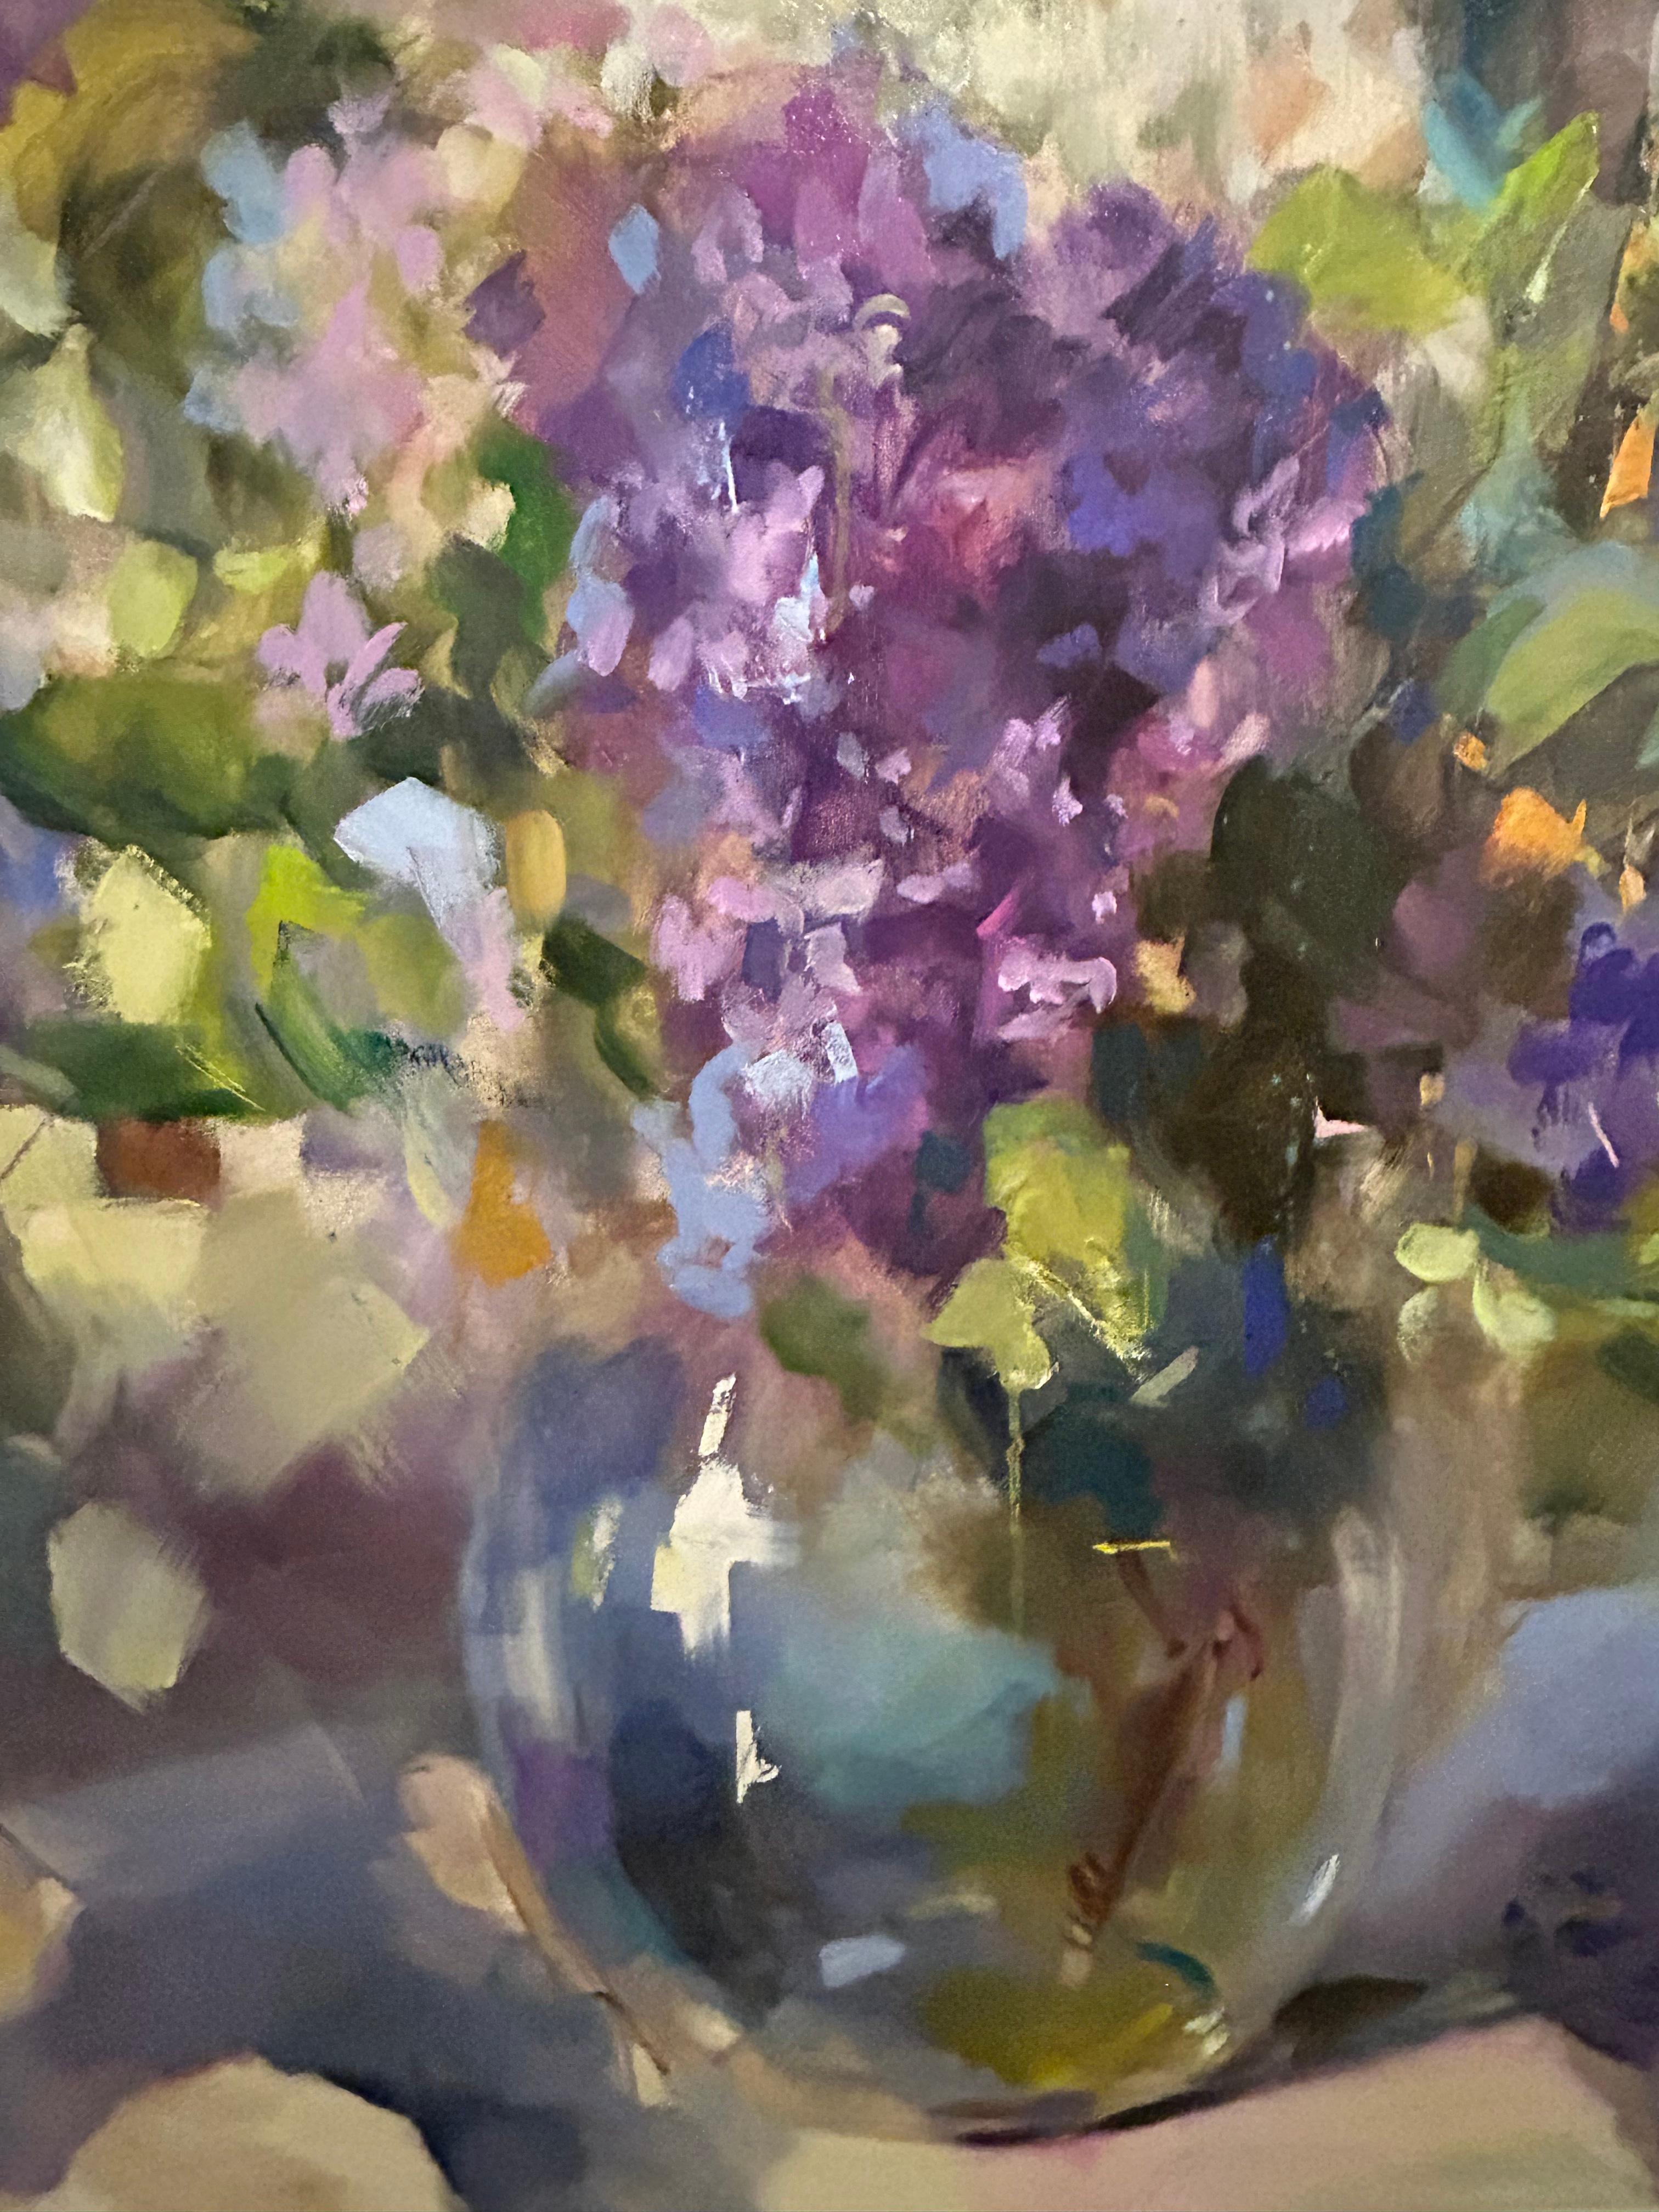 Original Oil on Canvas work by Russian-Canadian artist Anna Razumovskaya featuring impressionist style purple flowers and a vase. Razumovskaya's signature soft brushwork is on display in this piece, creating a vase of hydrangeas out of simple